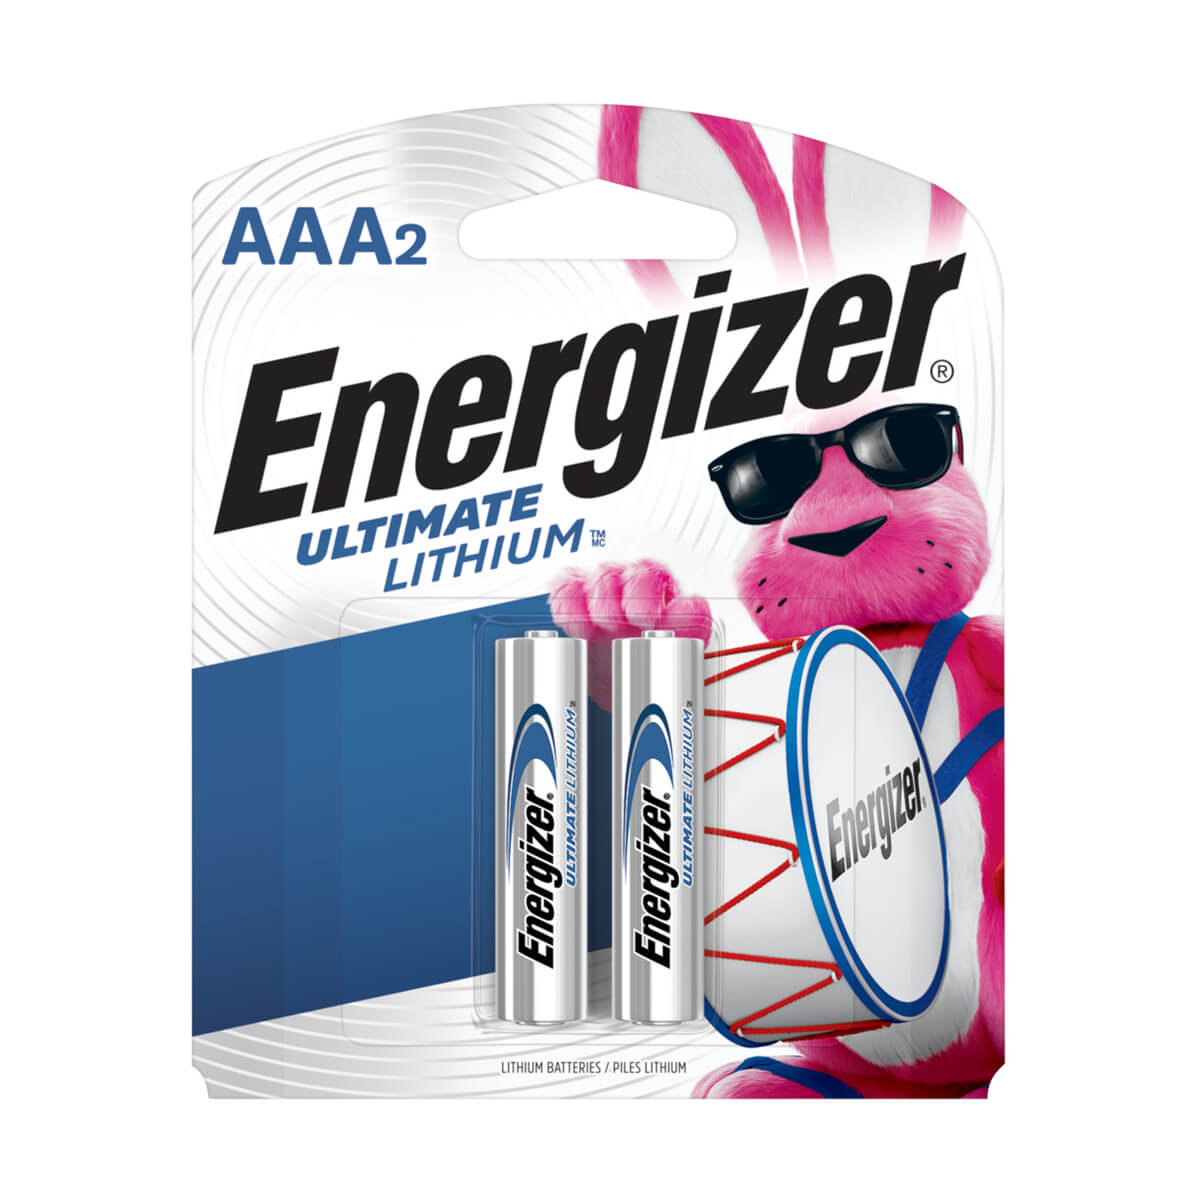 Energizer Lithium AAA Bateries - 2 Pack